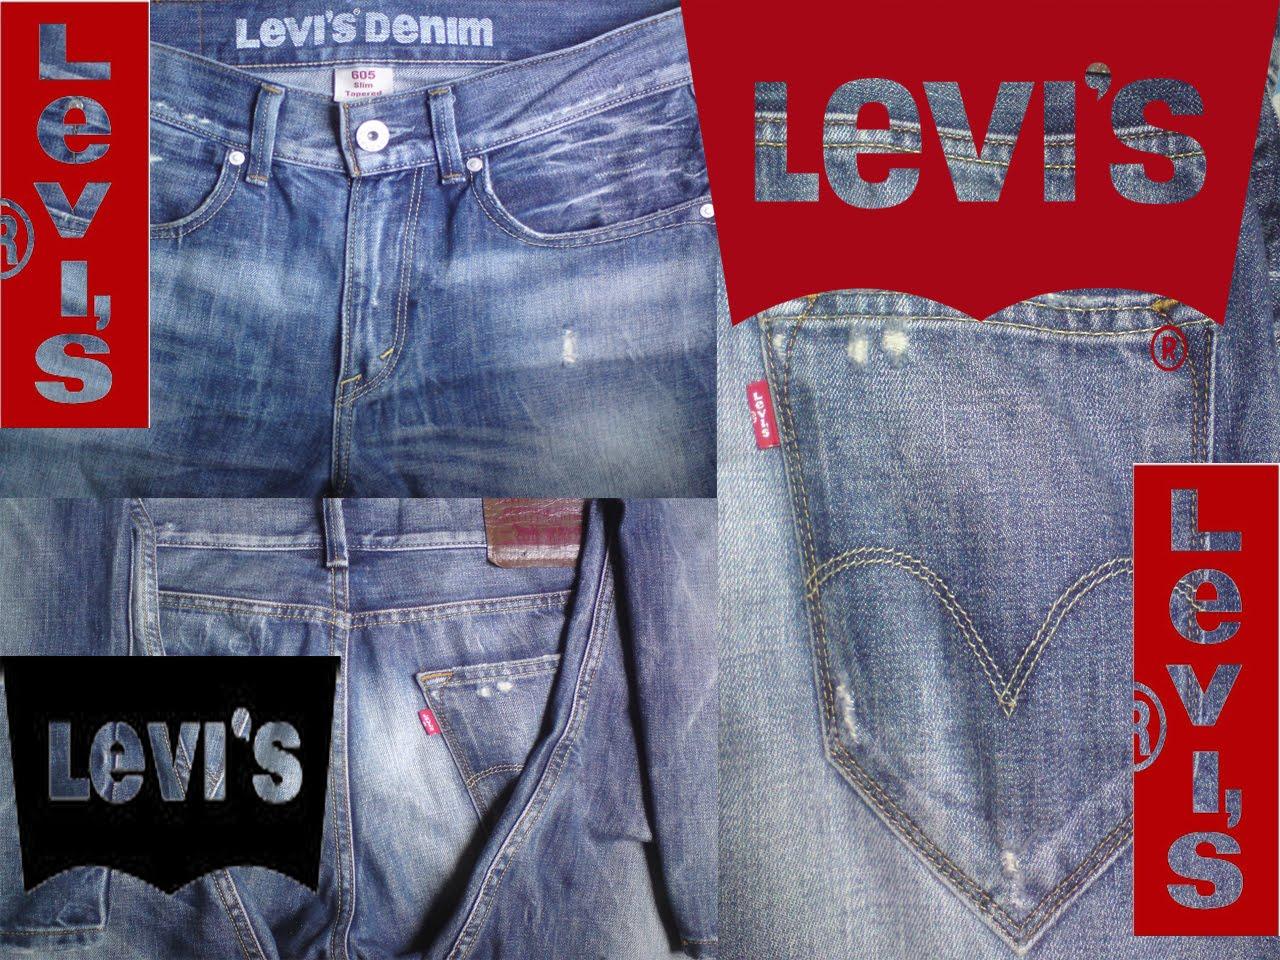 Gallery. LEVI&;S. PASSION FOR JEANS